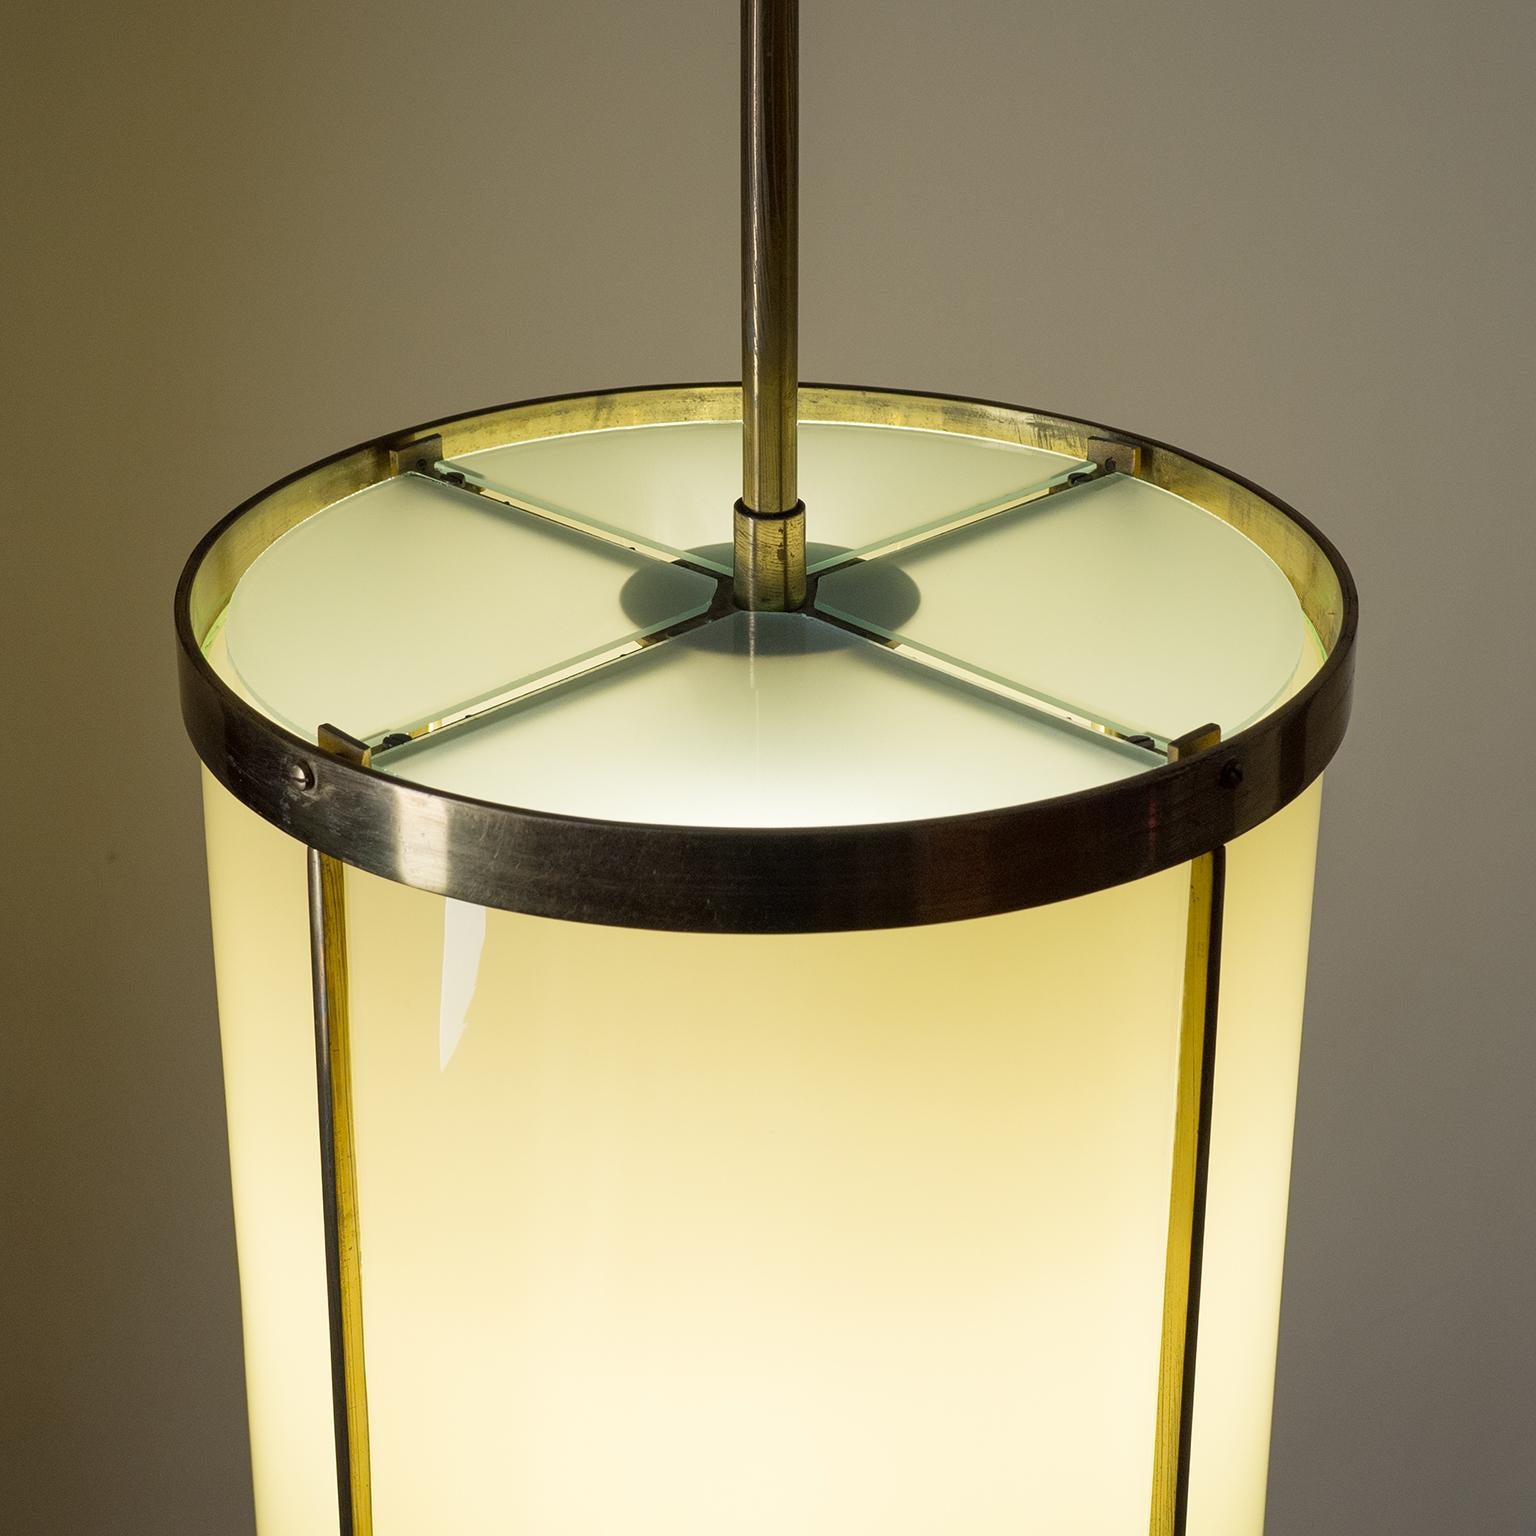 Oversize Drum Lantern, 1930s, Sand-Colored Glass and Brass For Sale 5